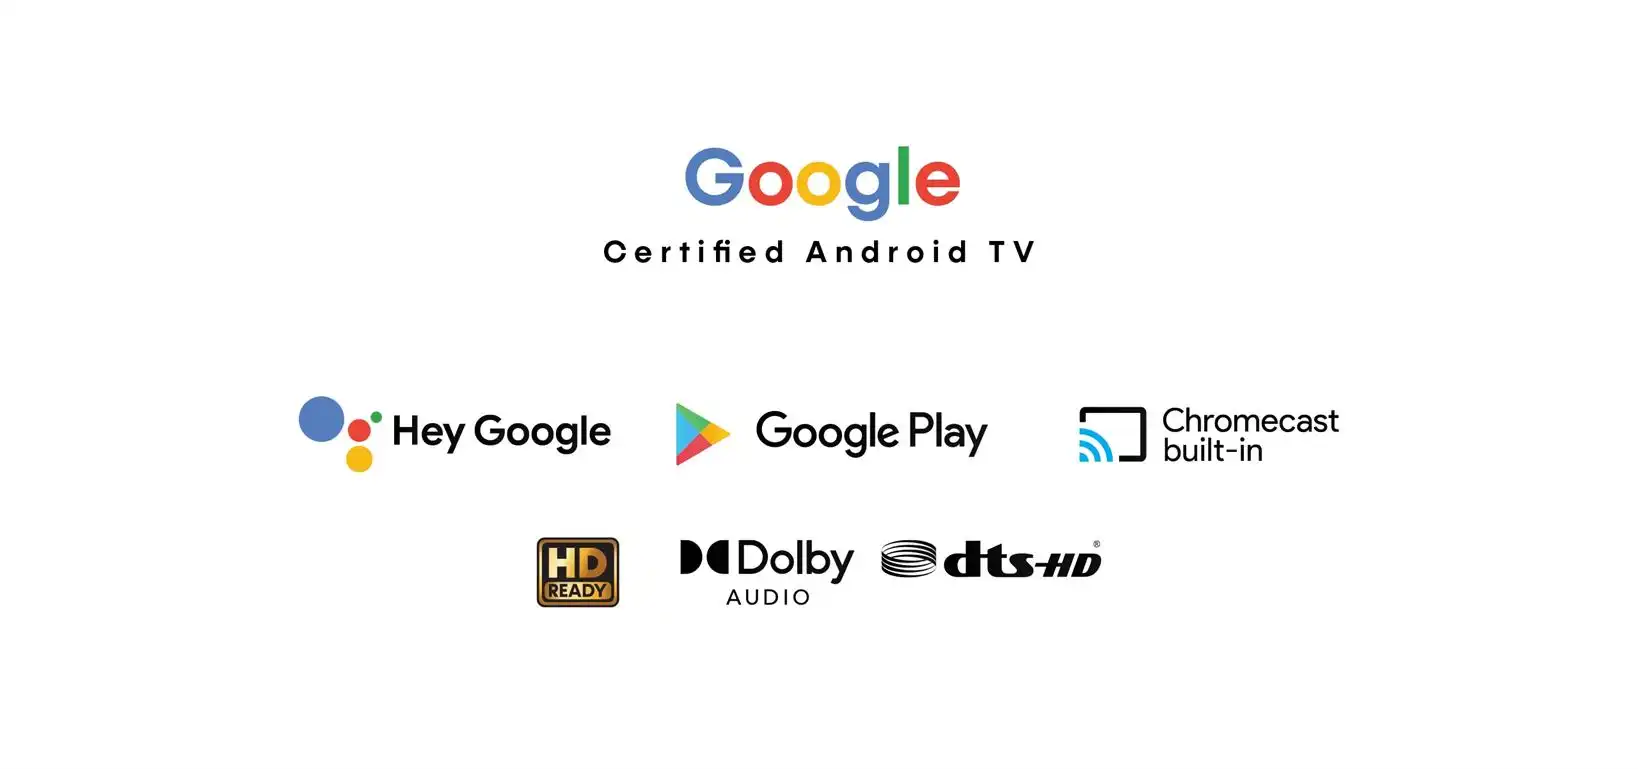 impex (32 inch) grande 32 smart google certified smart android 9 hd ready led tv ,au20